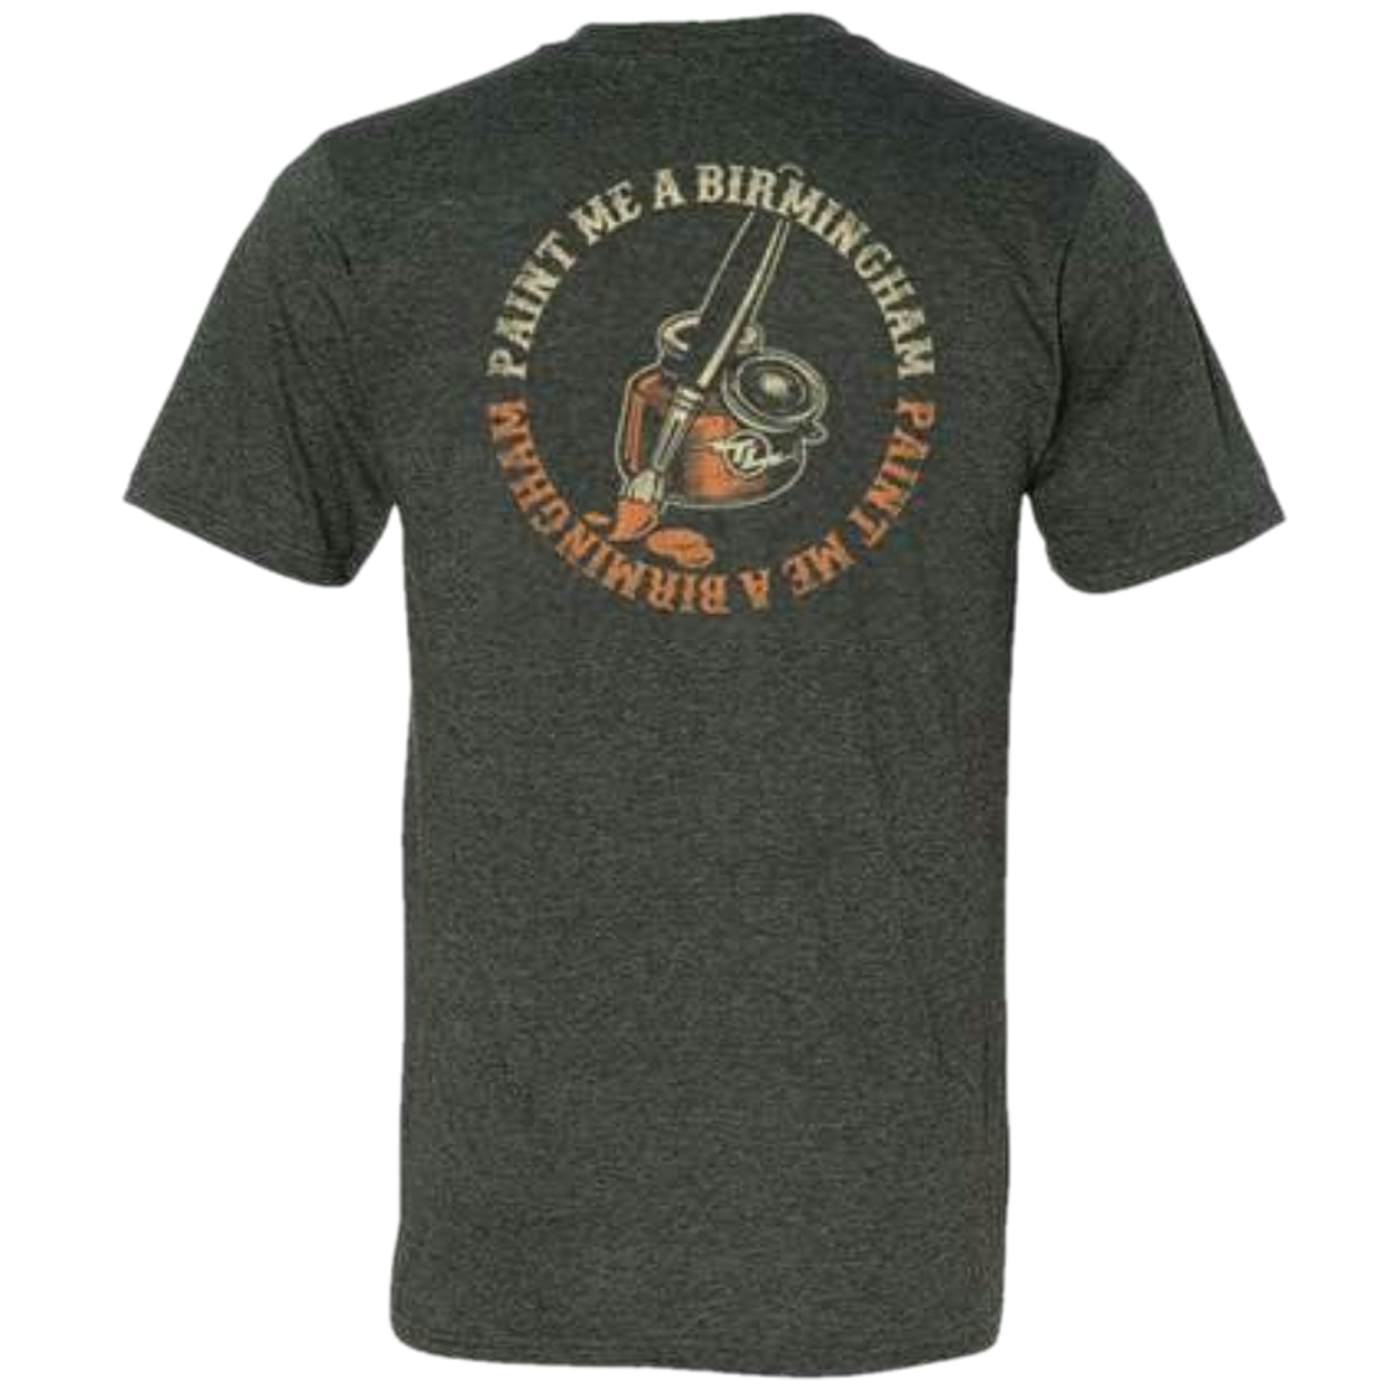 Tracy Lawrence Heather Grey Paint Me A Birmingham Tee